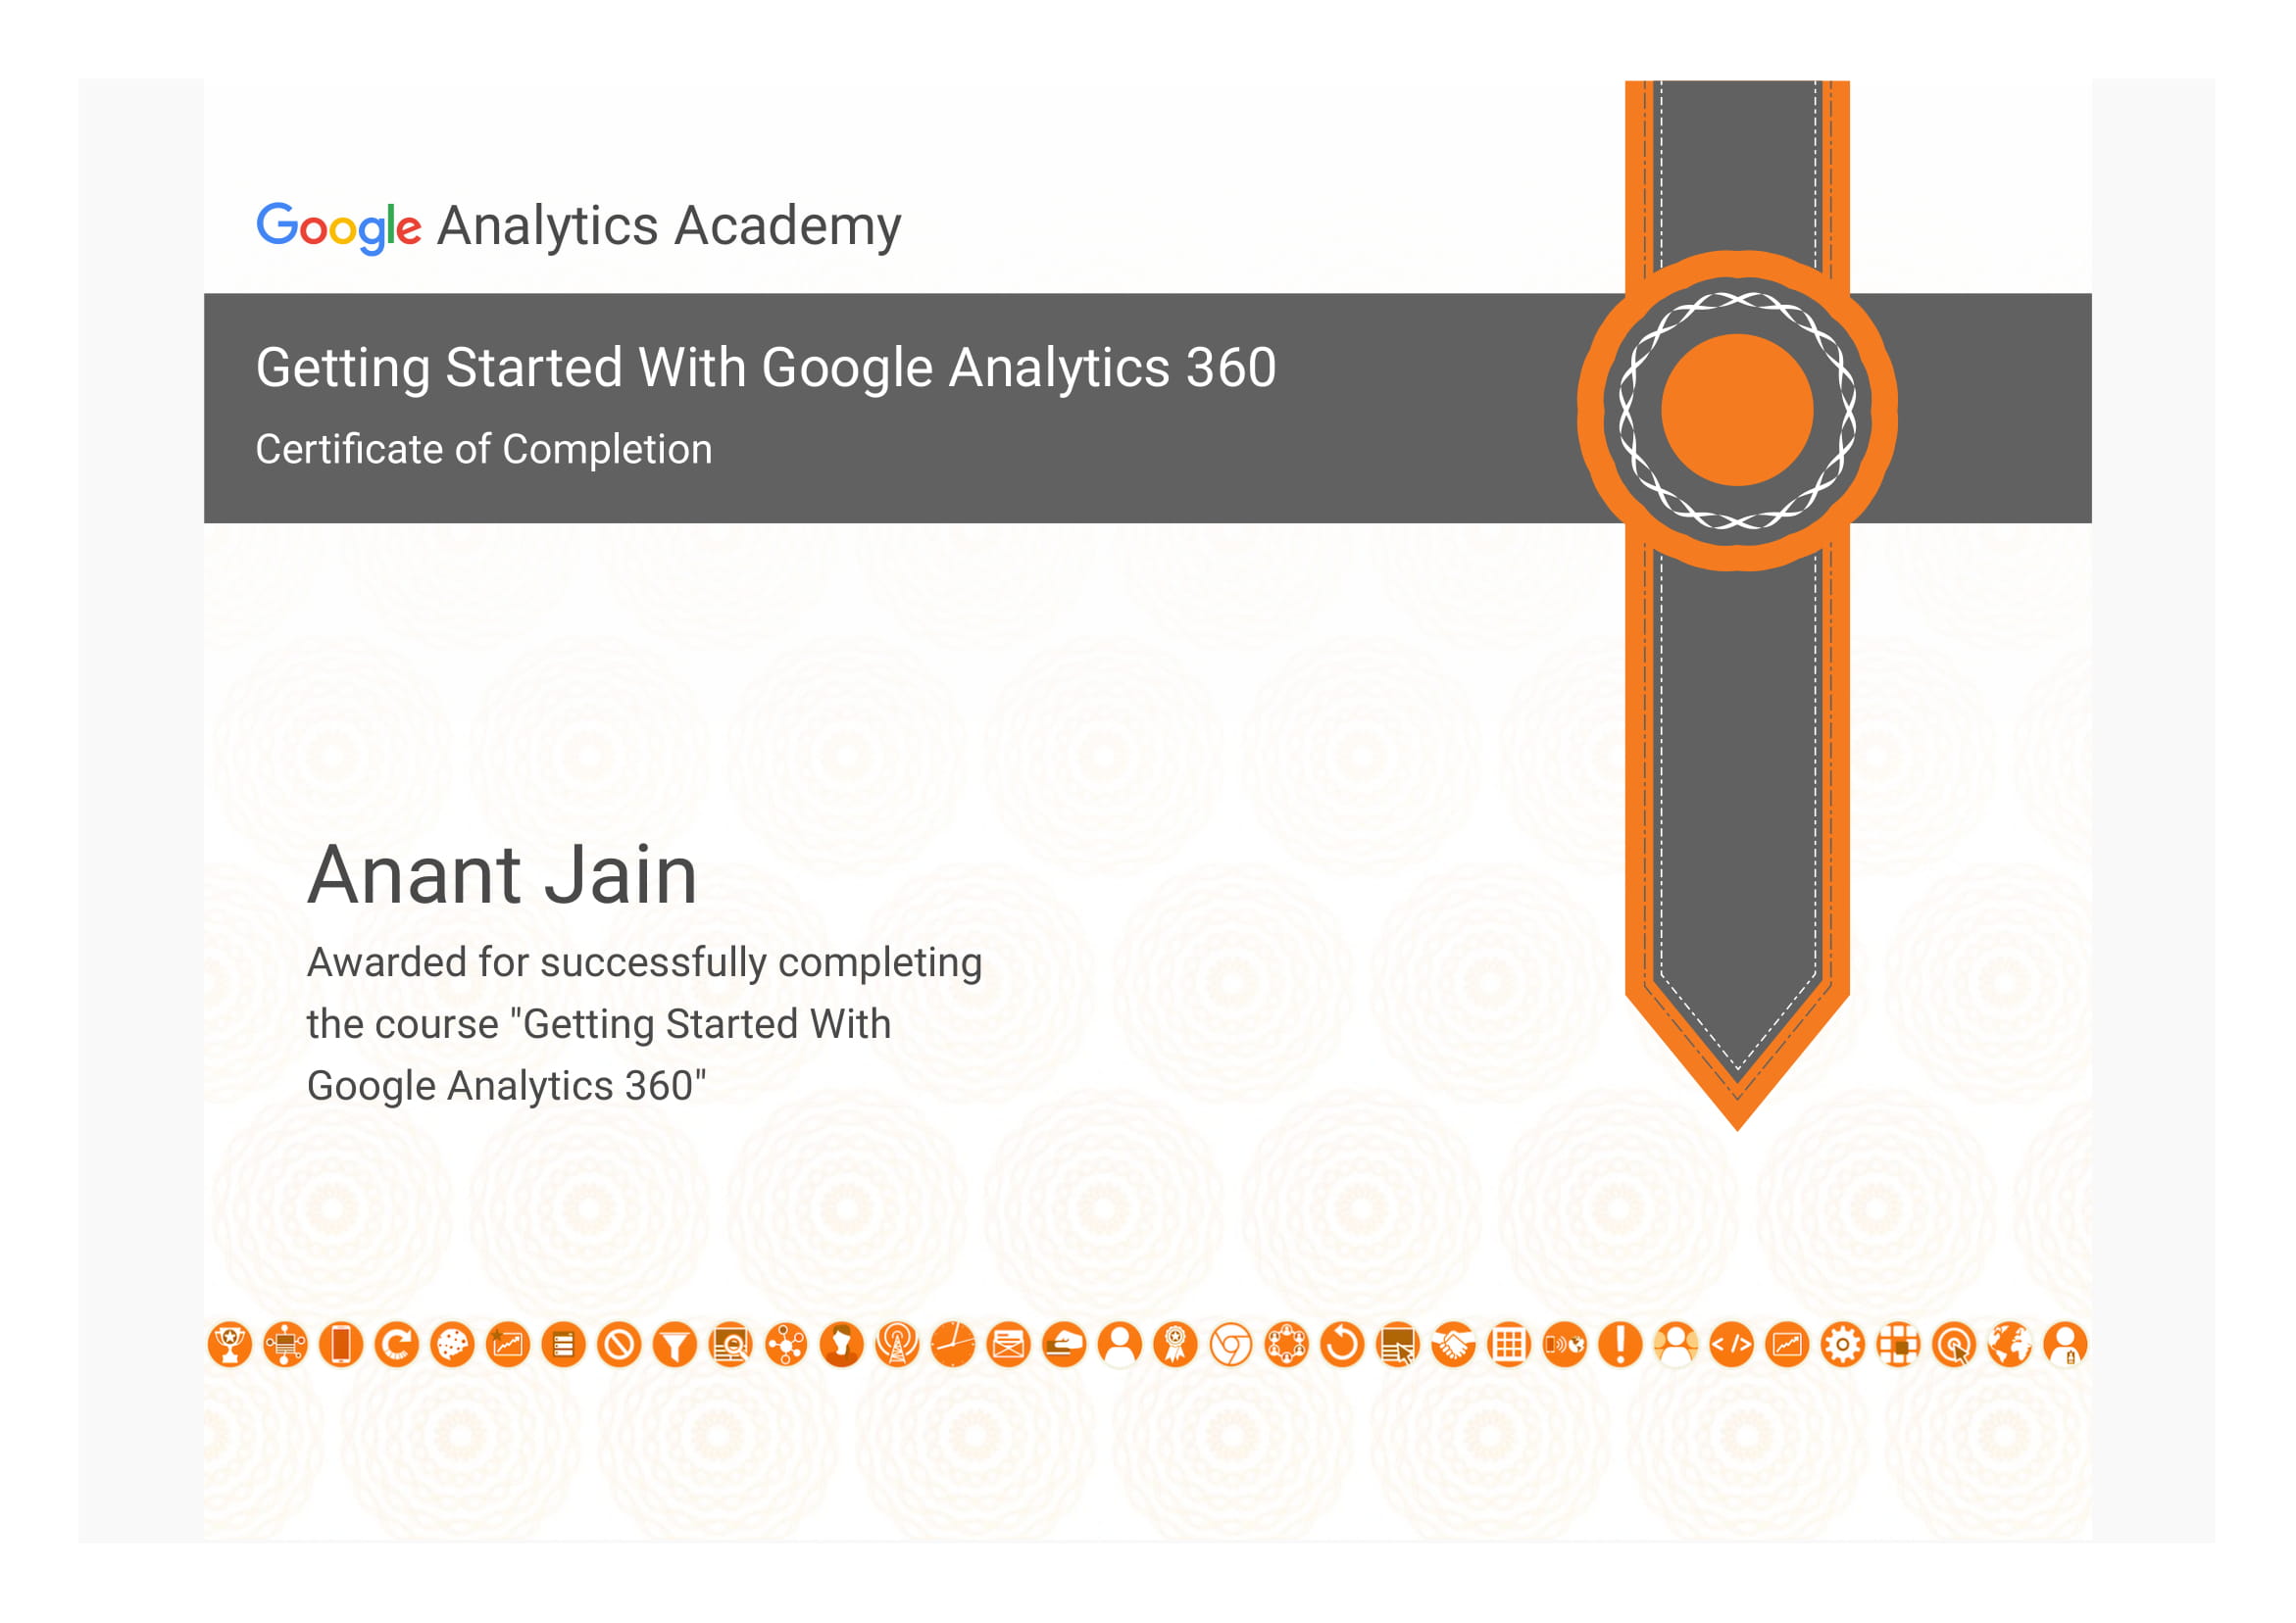 Getting started by Google Analytics 360